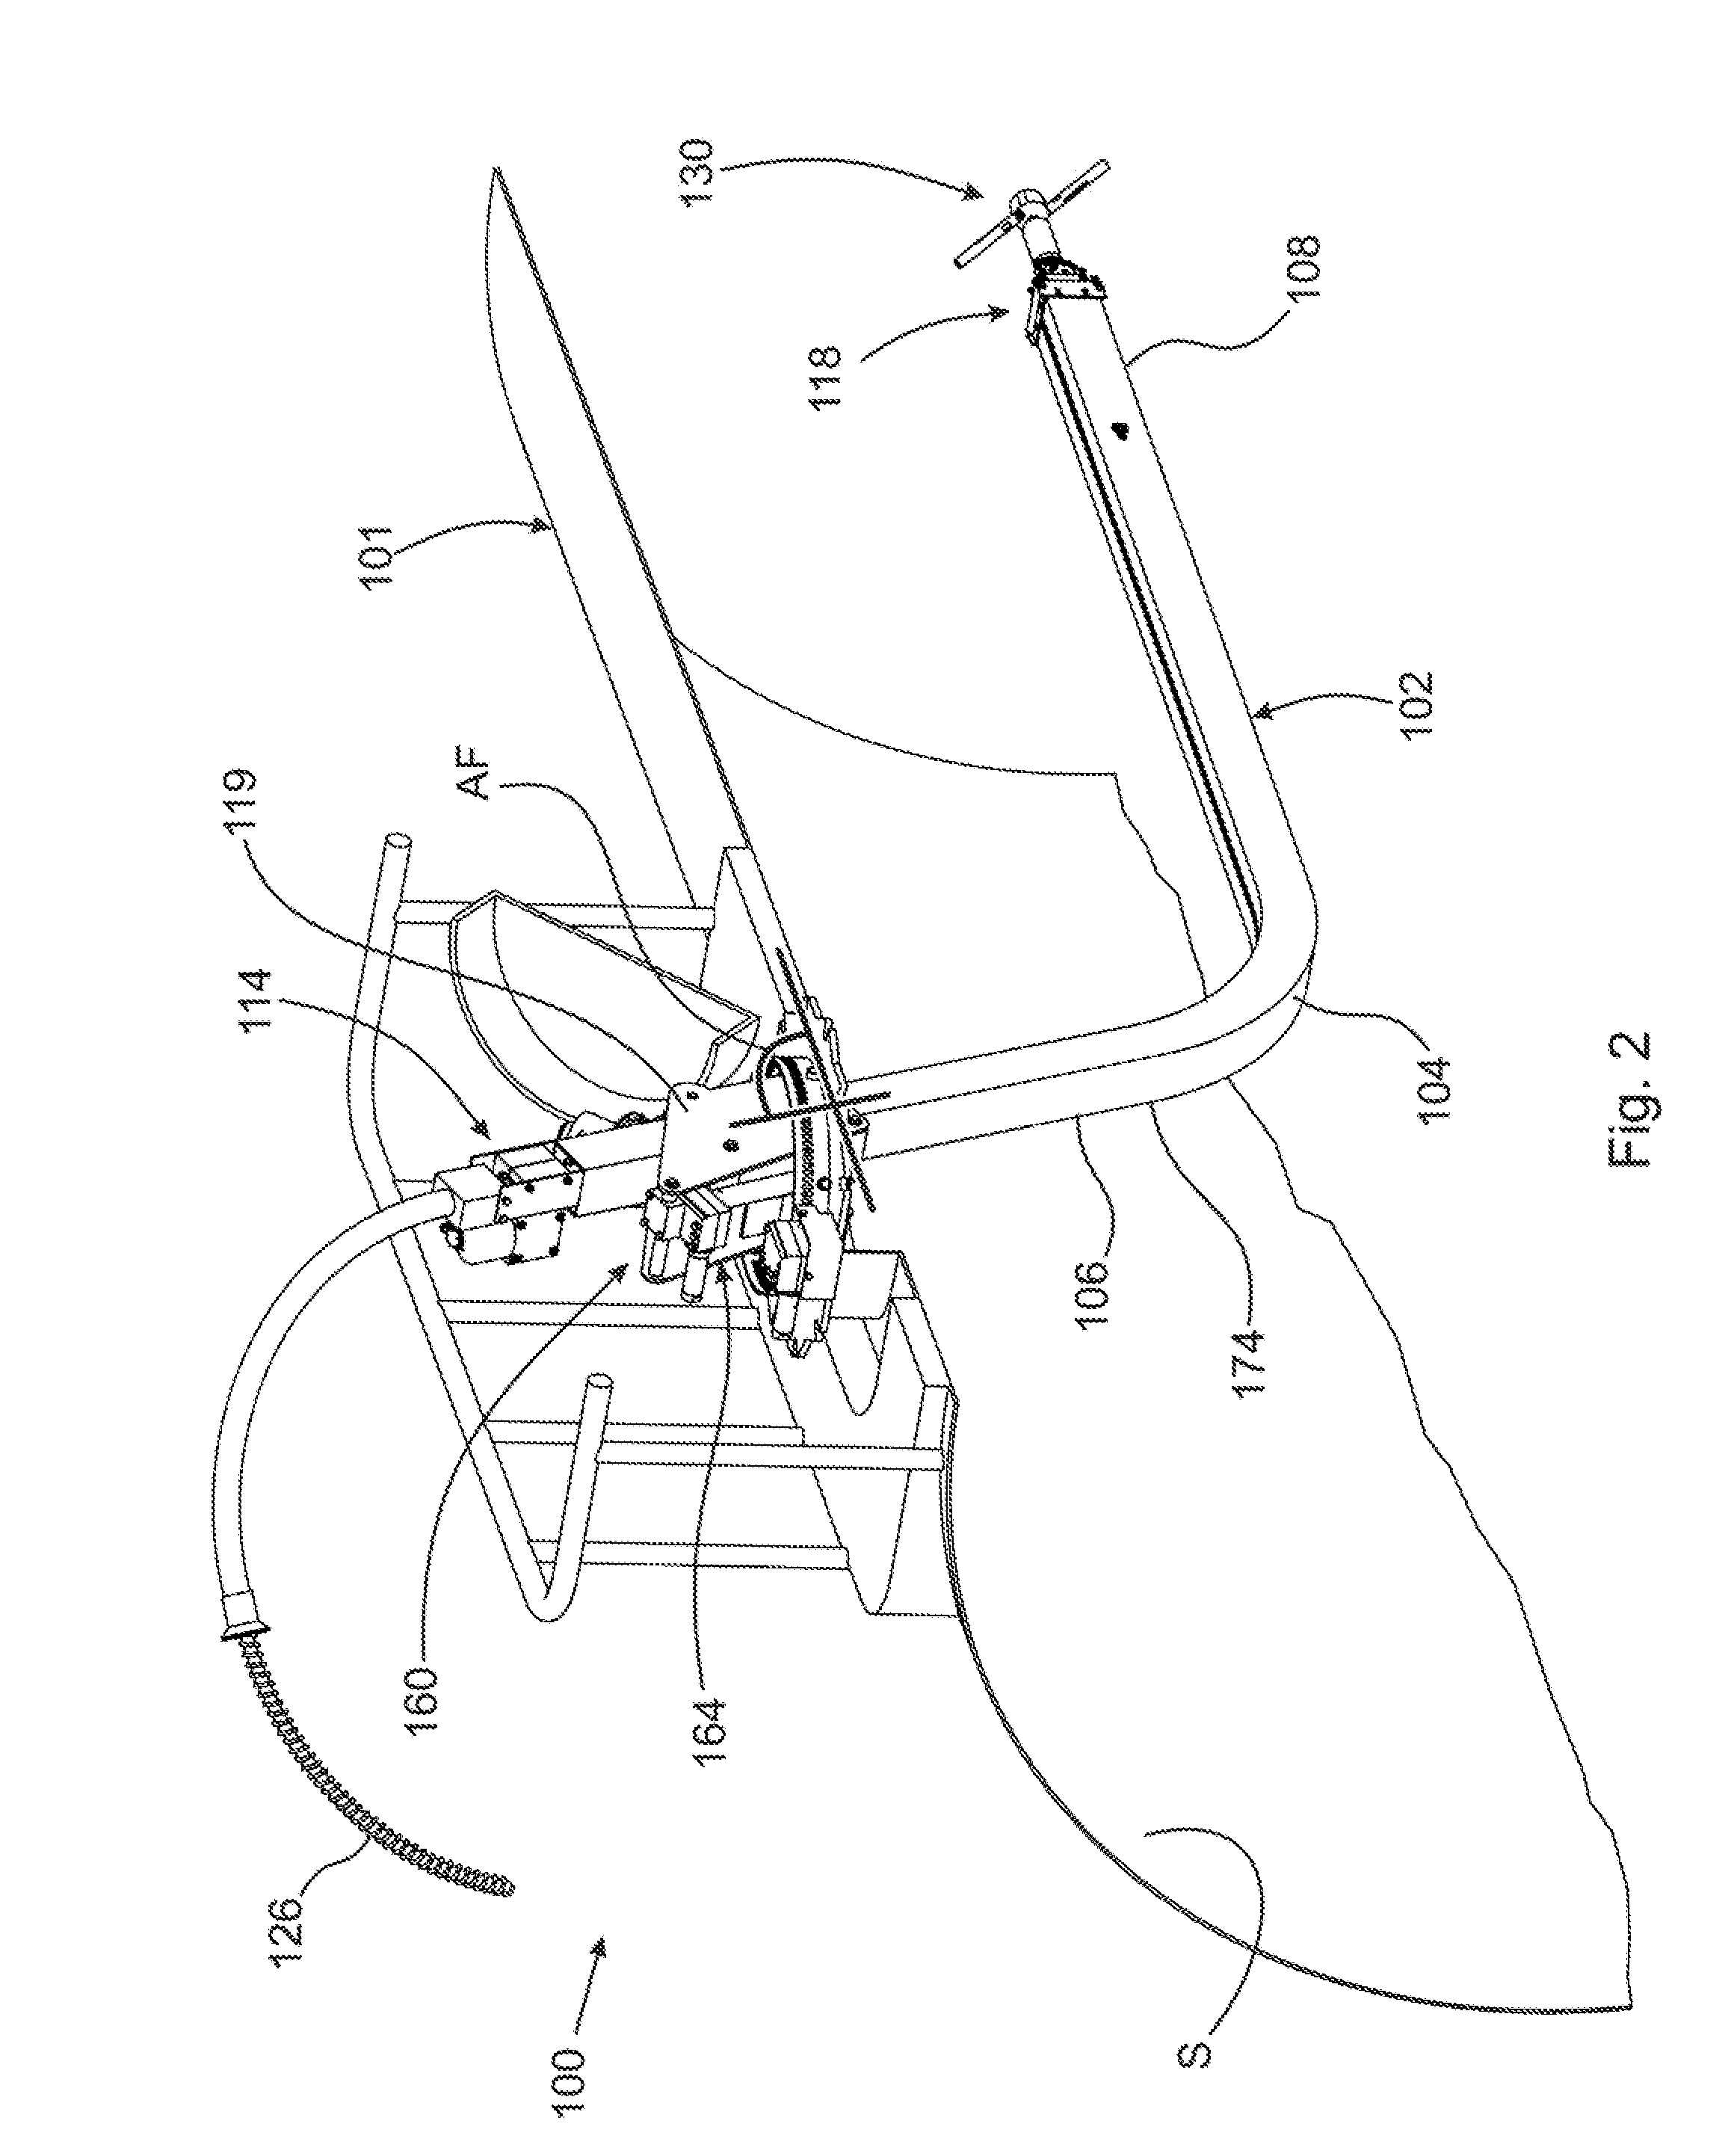 Apparatus for insertion in a tank and method thereof